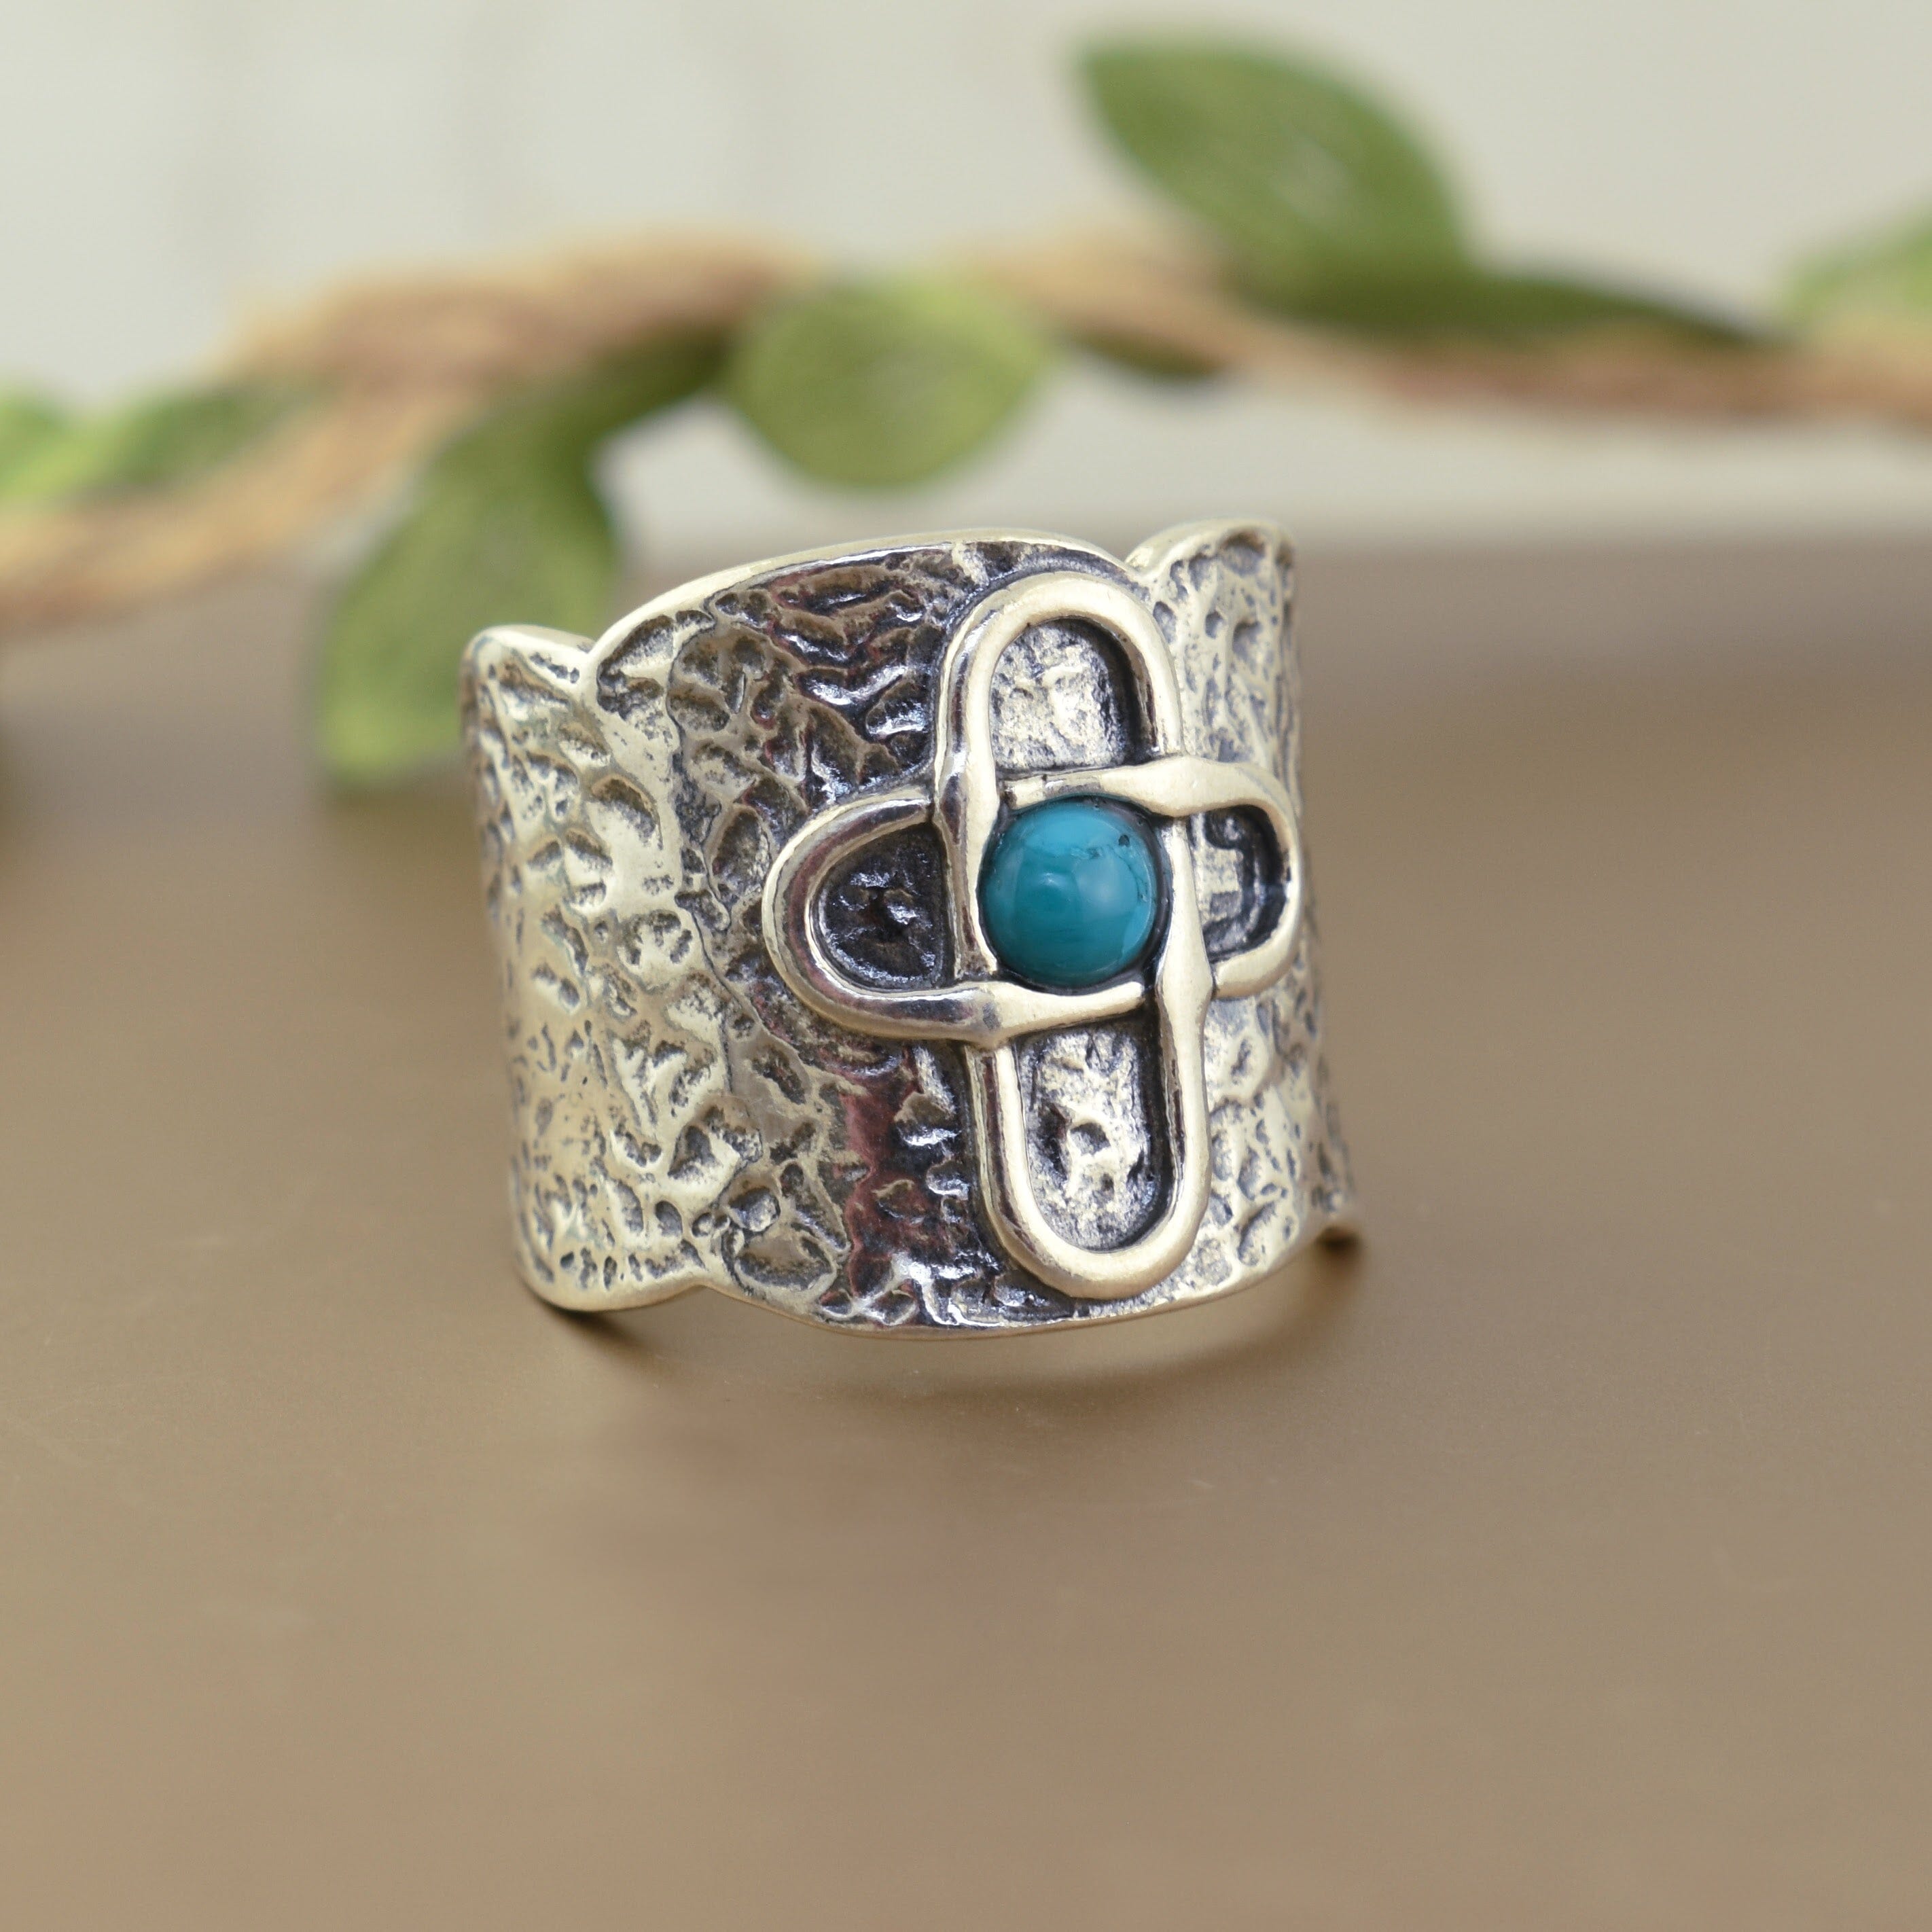 Sterling silver Christian Ring with turquoise